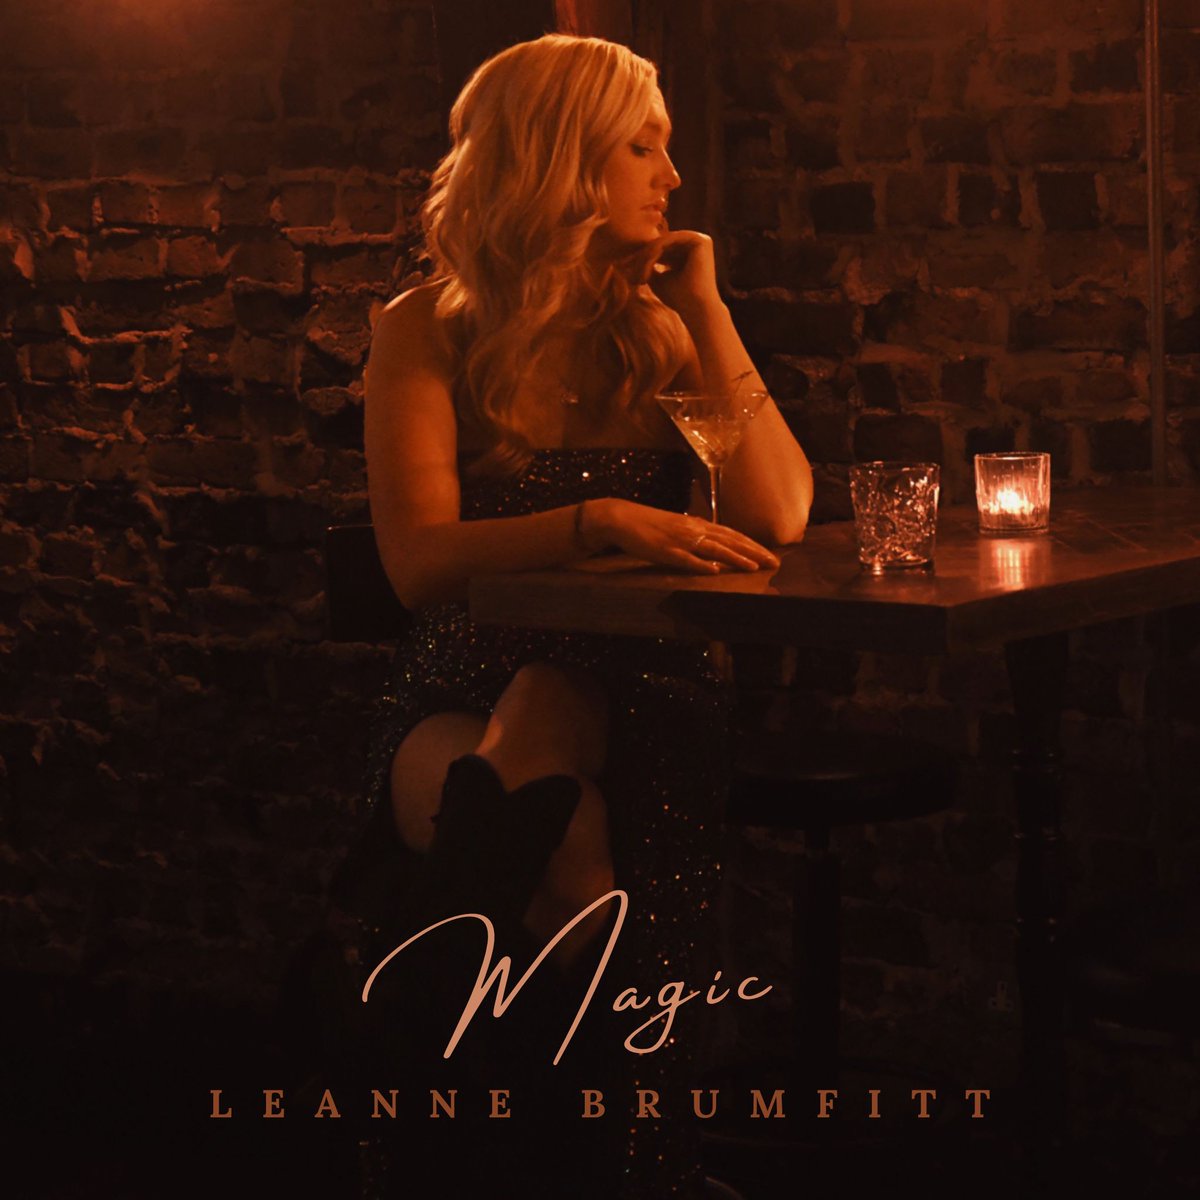 Leanne Brumfitt, new single 'Magic' reviewed in Rock the Joint Magazine.' Time for some sassy country pop!
#countrymusic #countrypop #girlsincountry #leannebrumfitt #newsingles